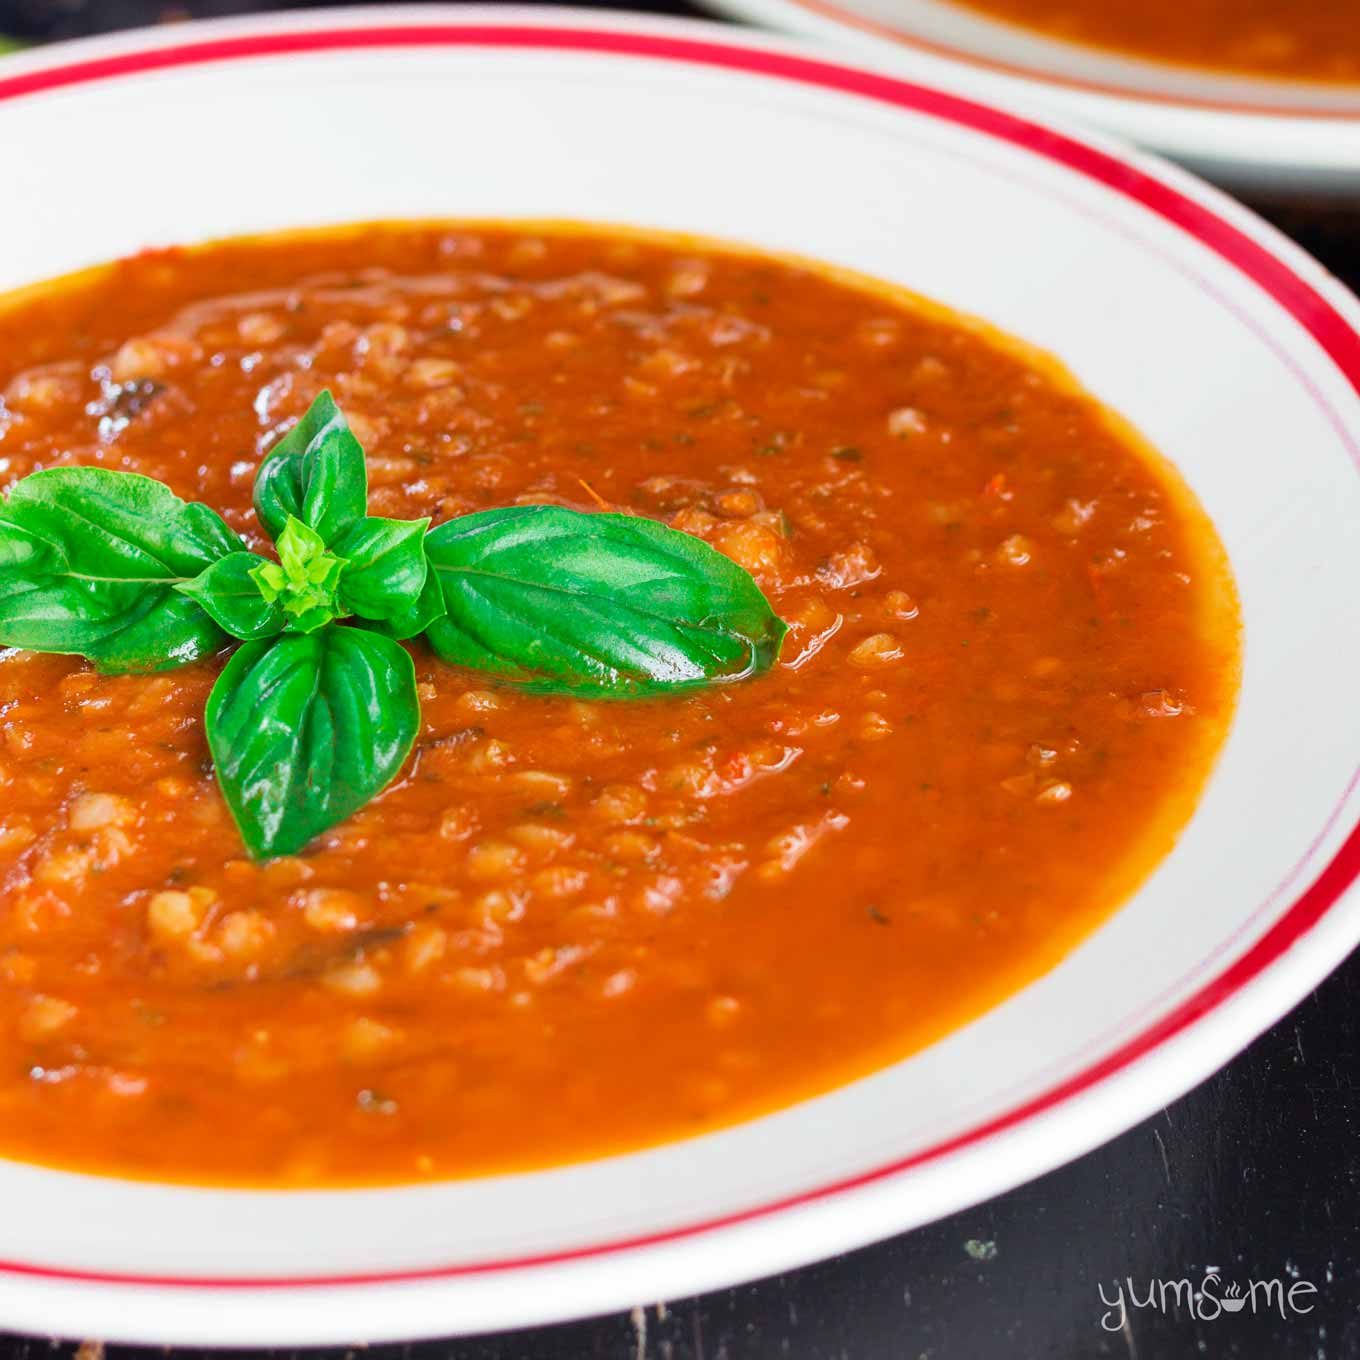 social media image - spicy tomato, basil, and buckwheat soup | yumsome.com